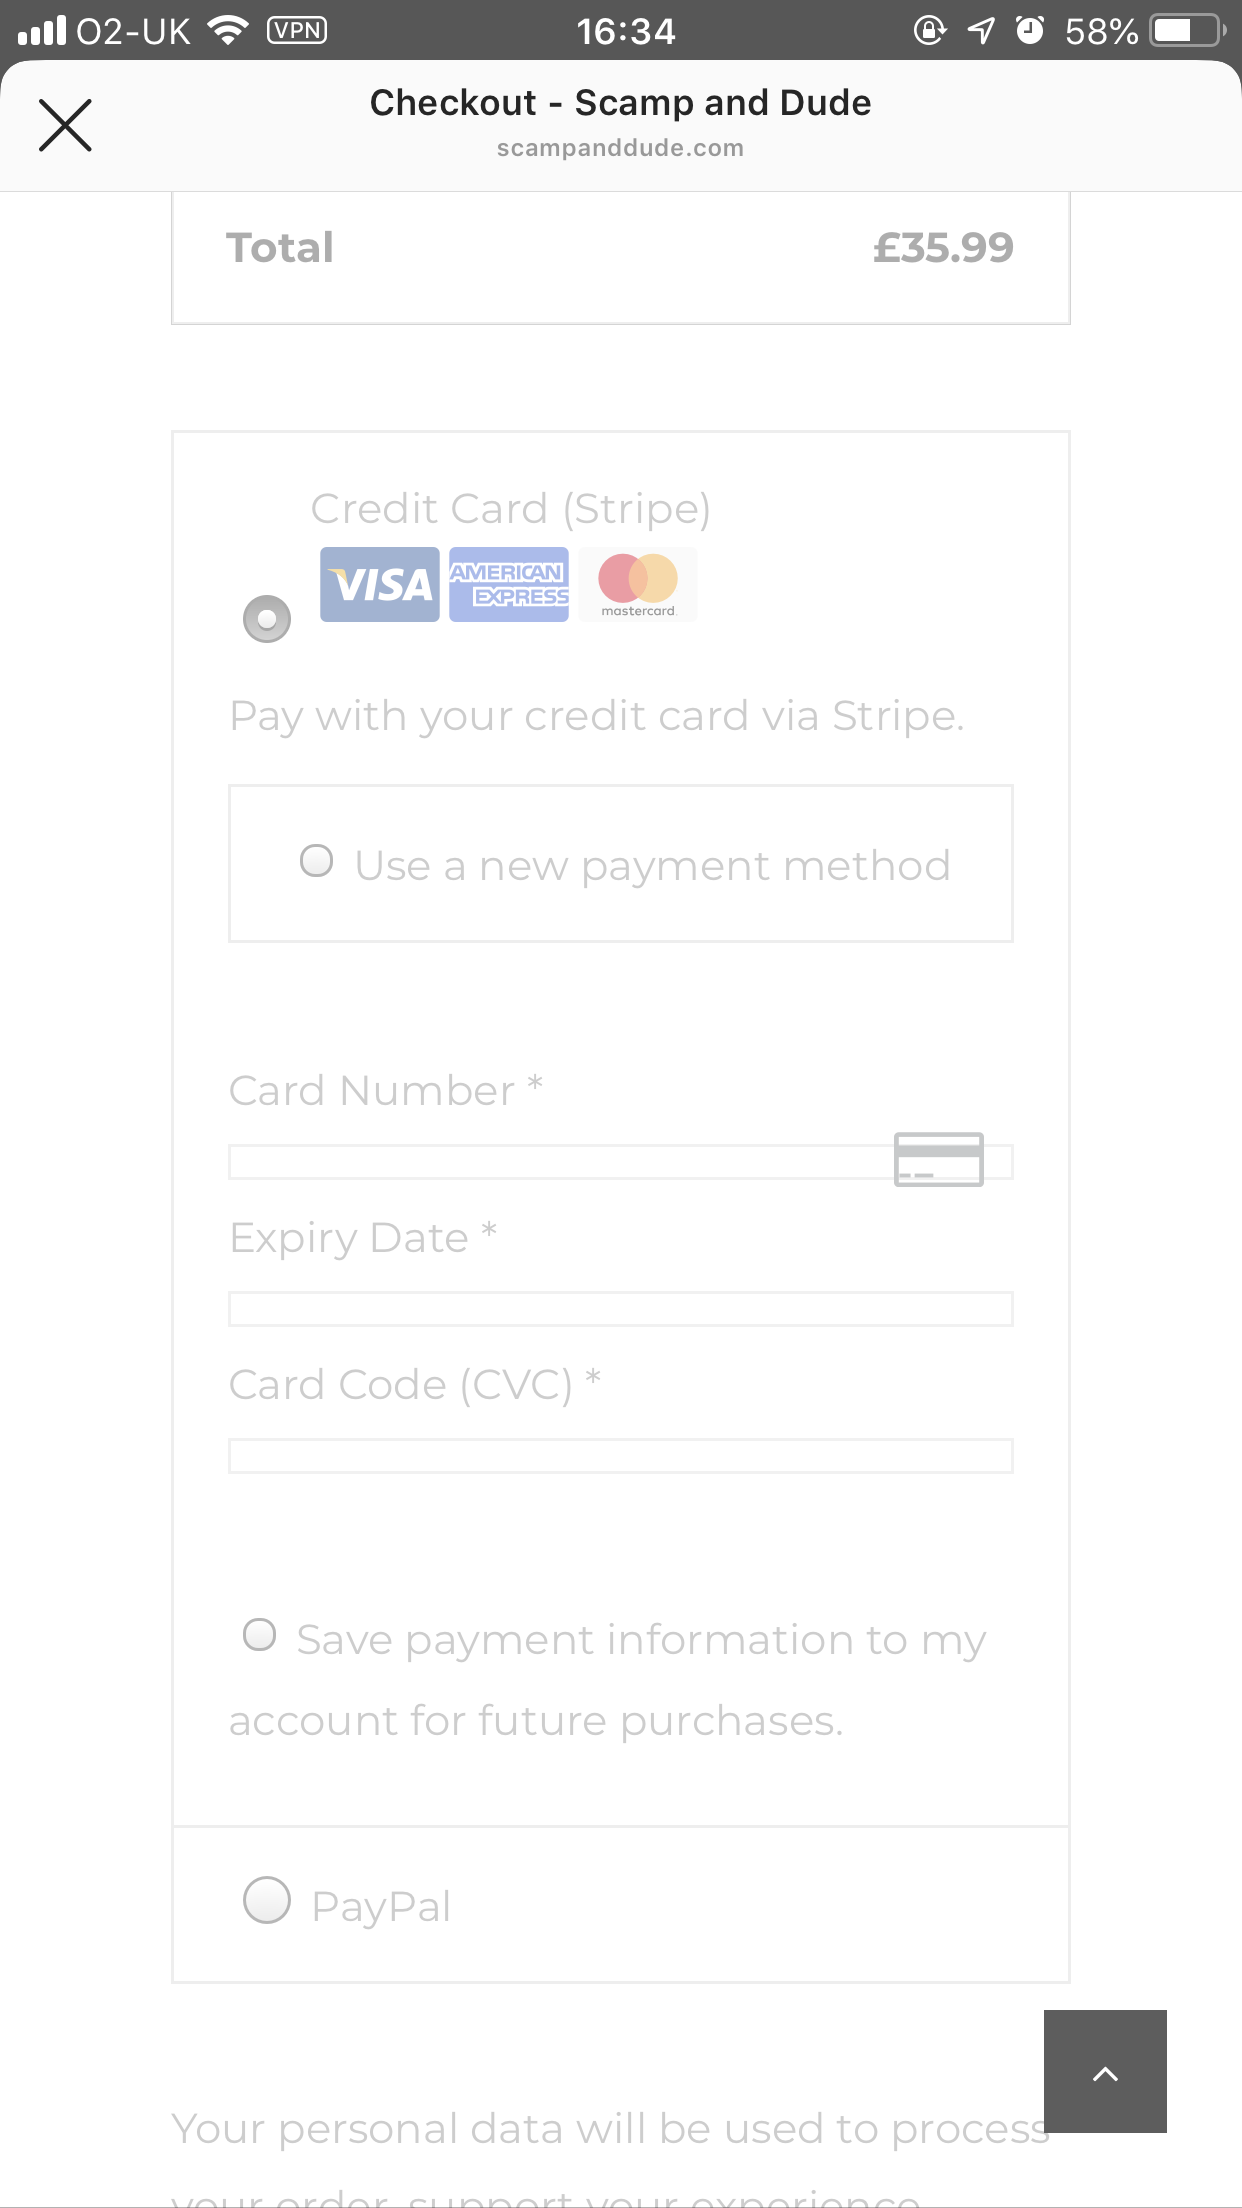 Greyed out payment options